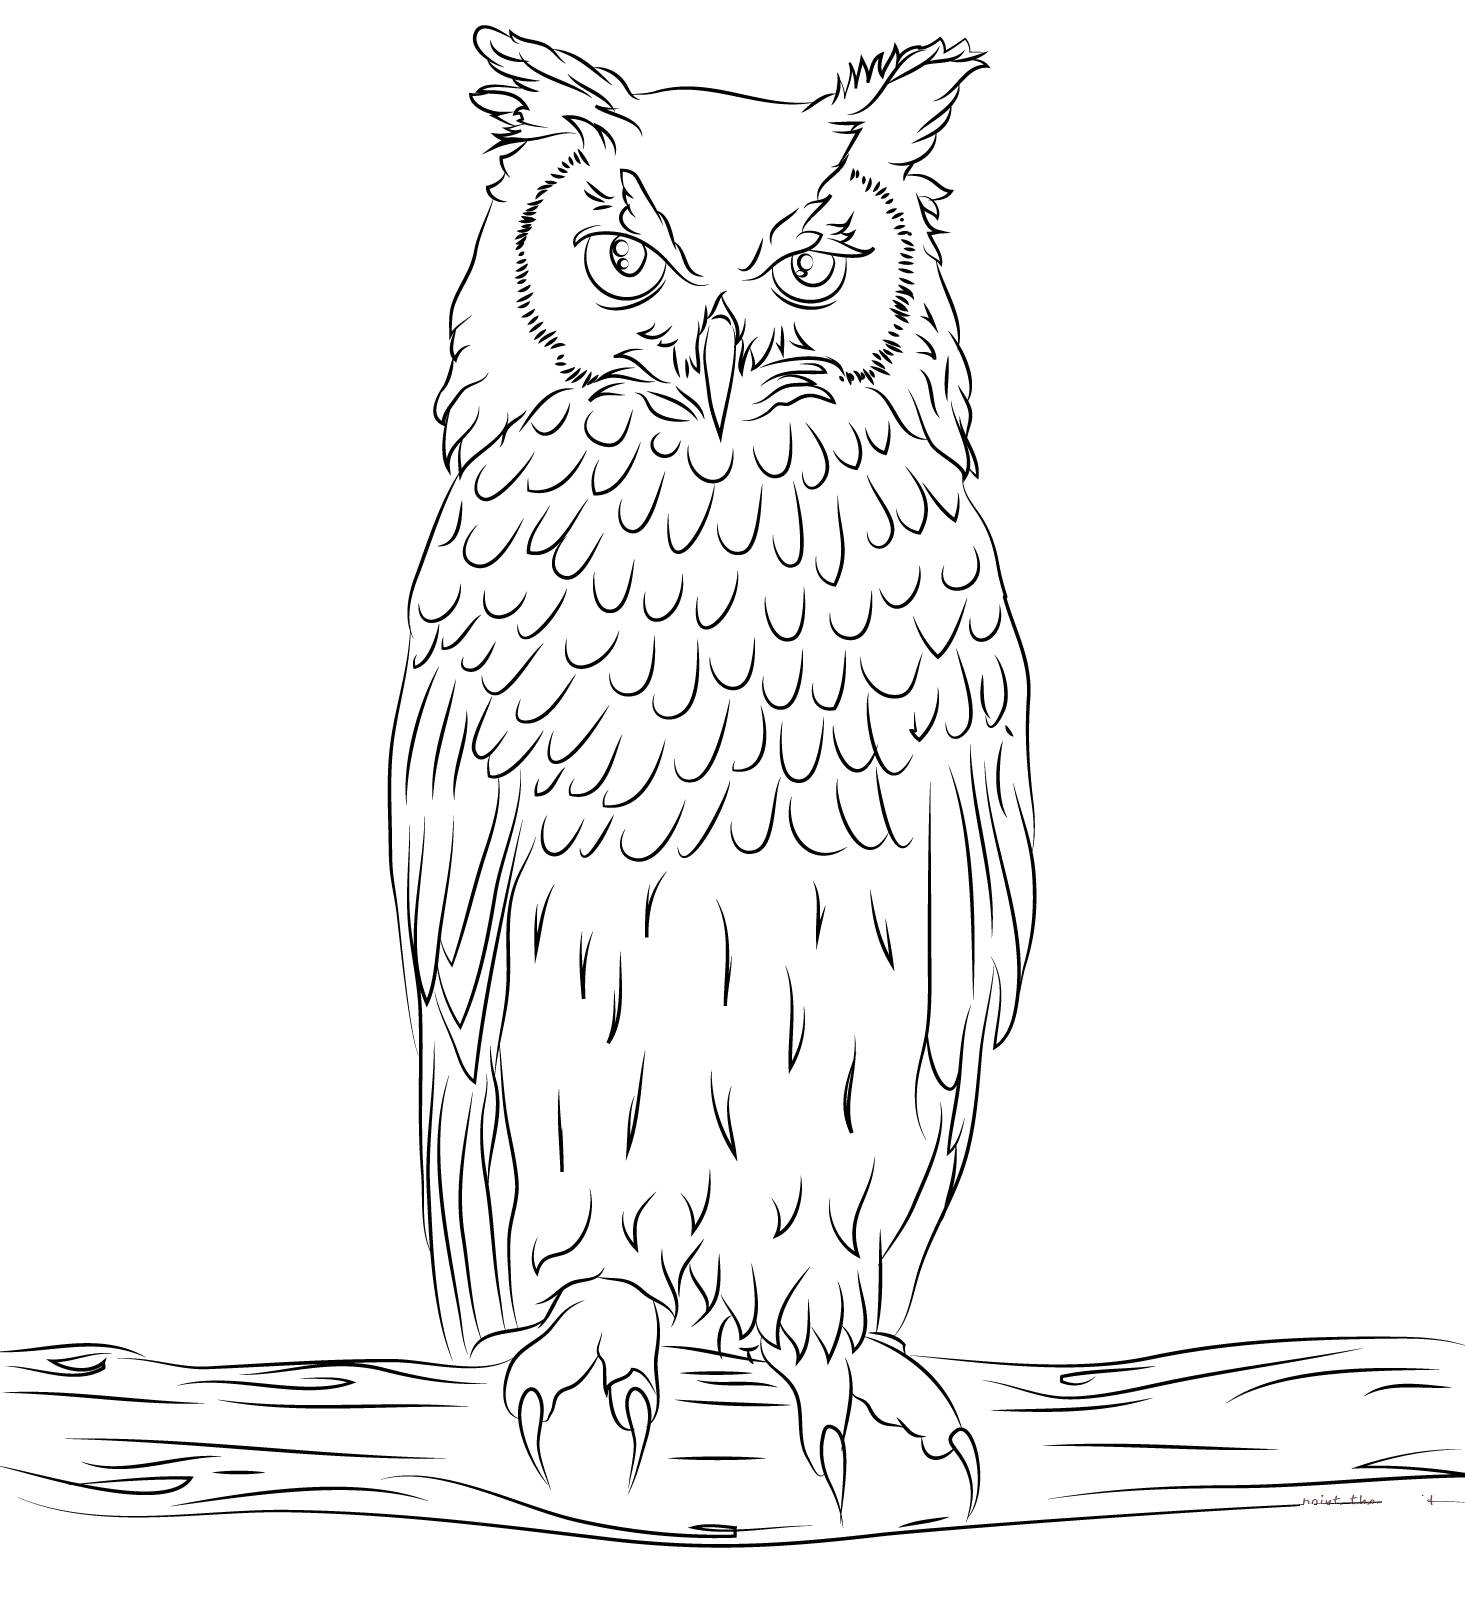 Eagle owl on a branch